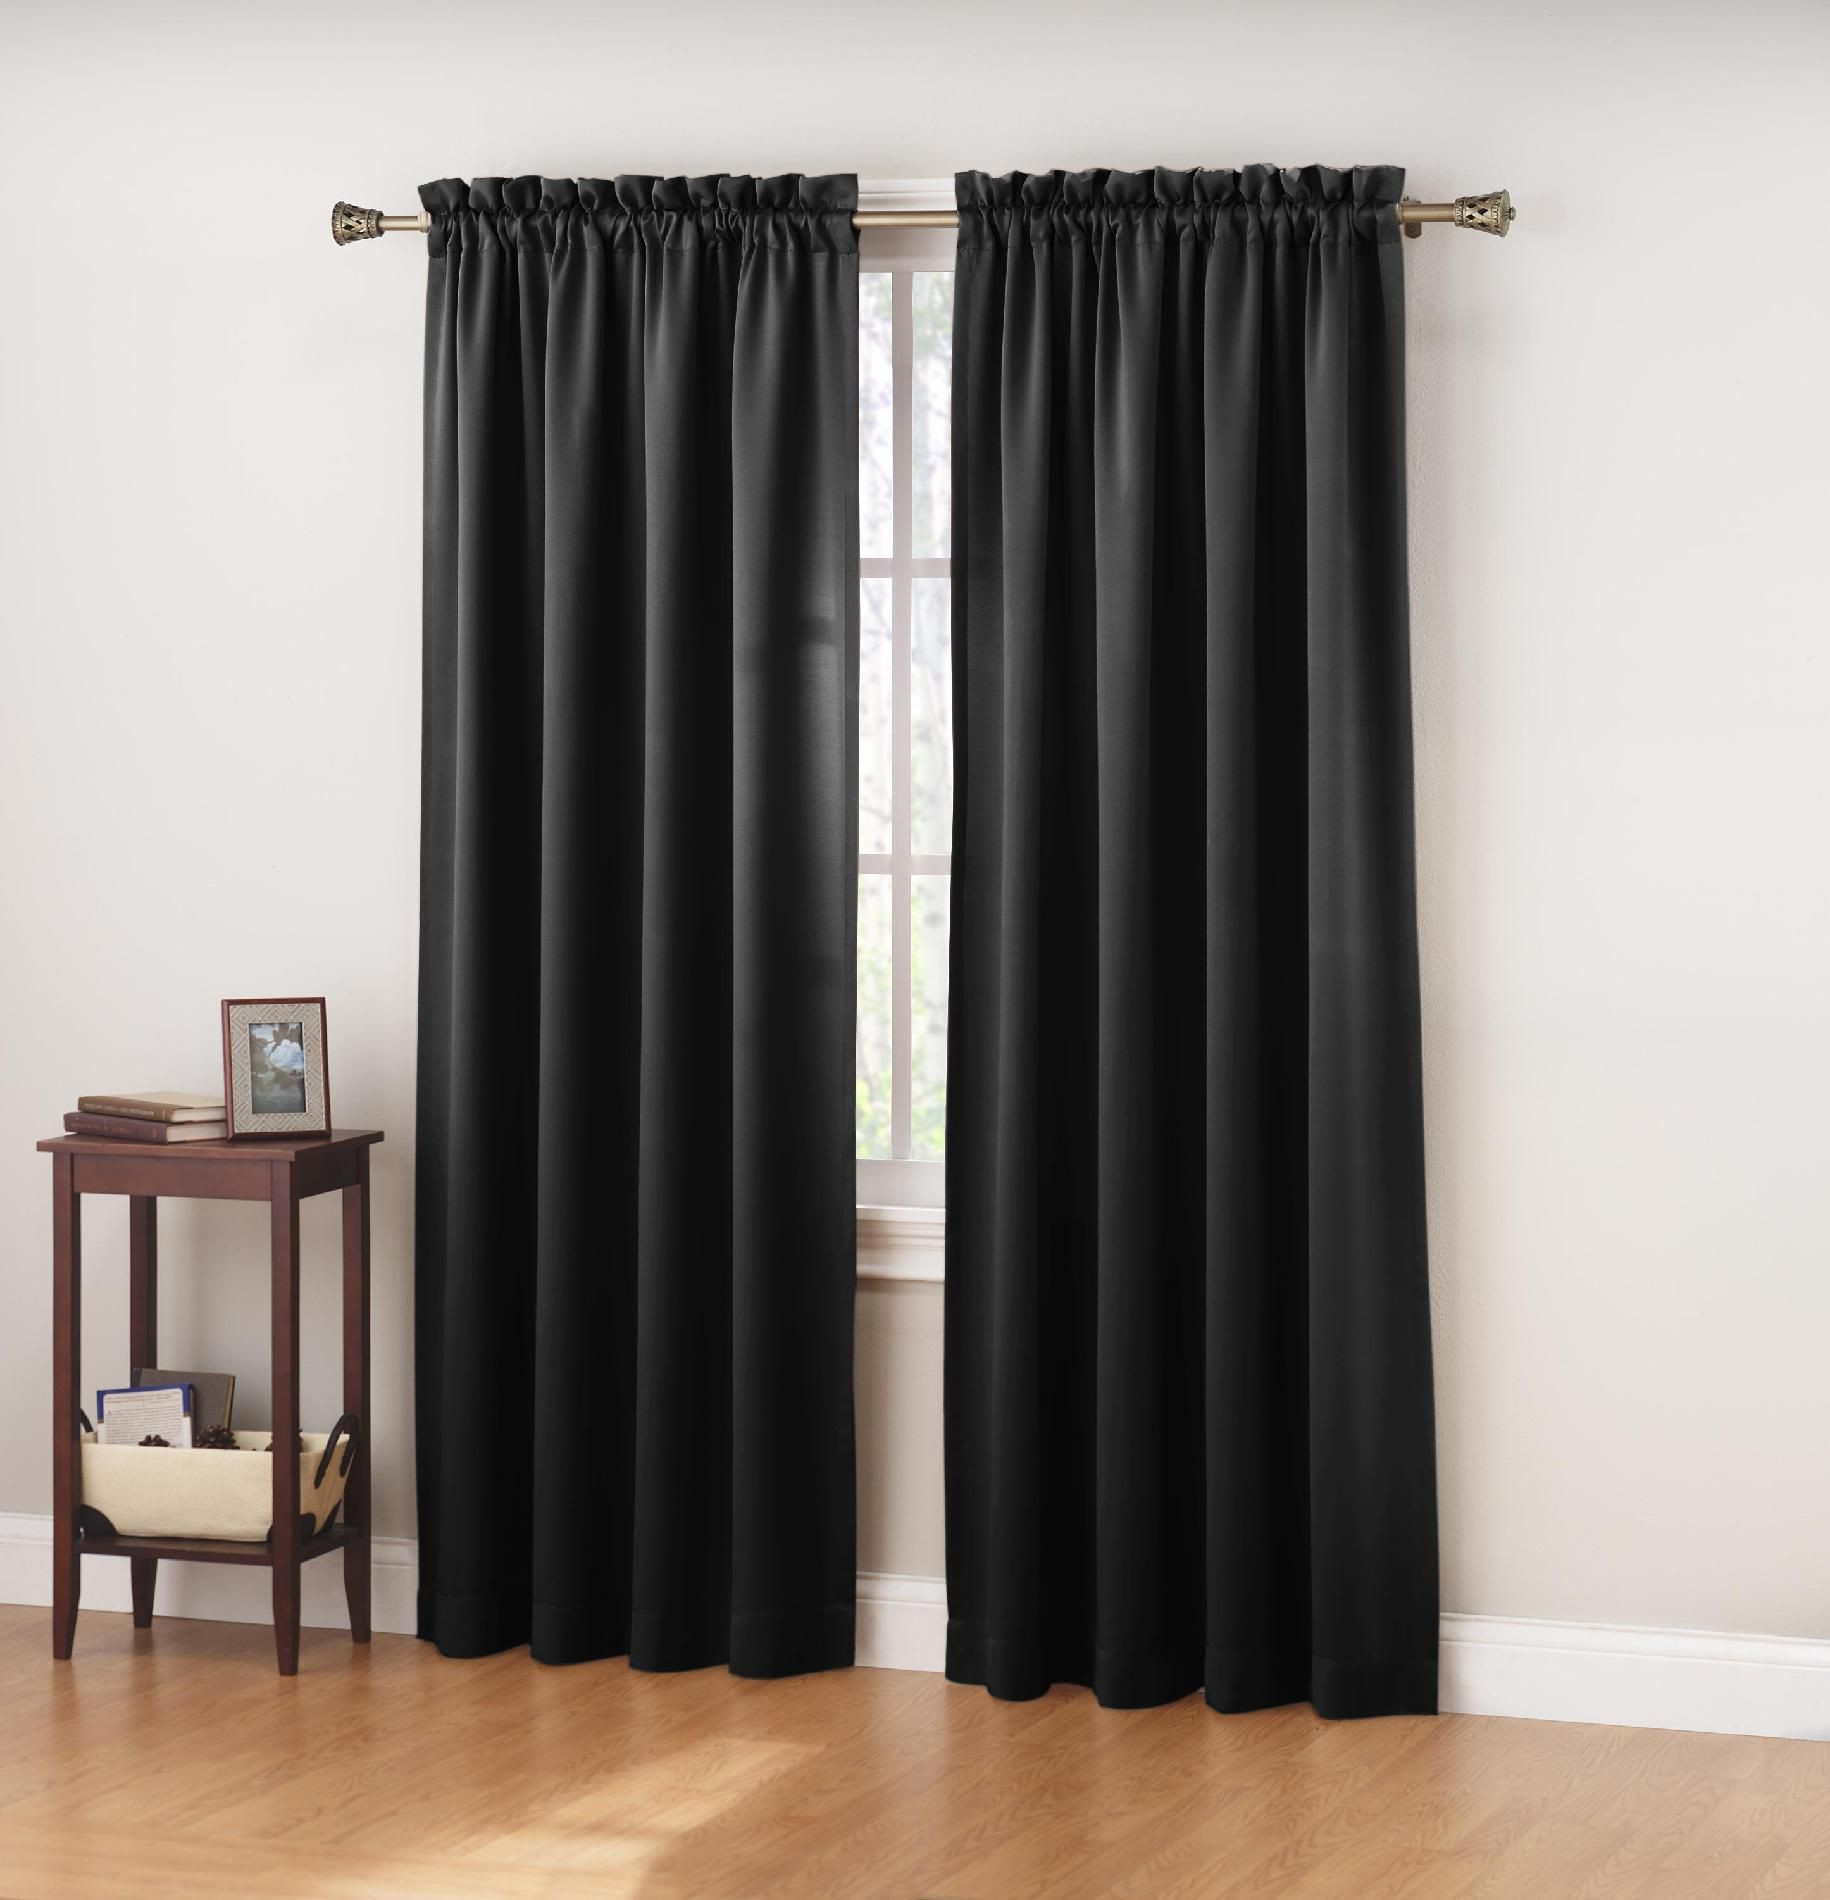 Sears Curtains For Living Room
 Idea by Sherrie Paulk on Projects to Try